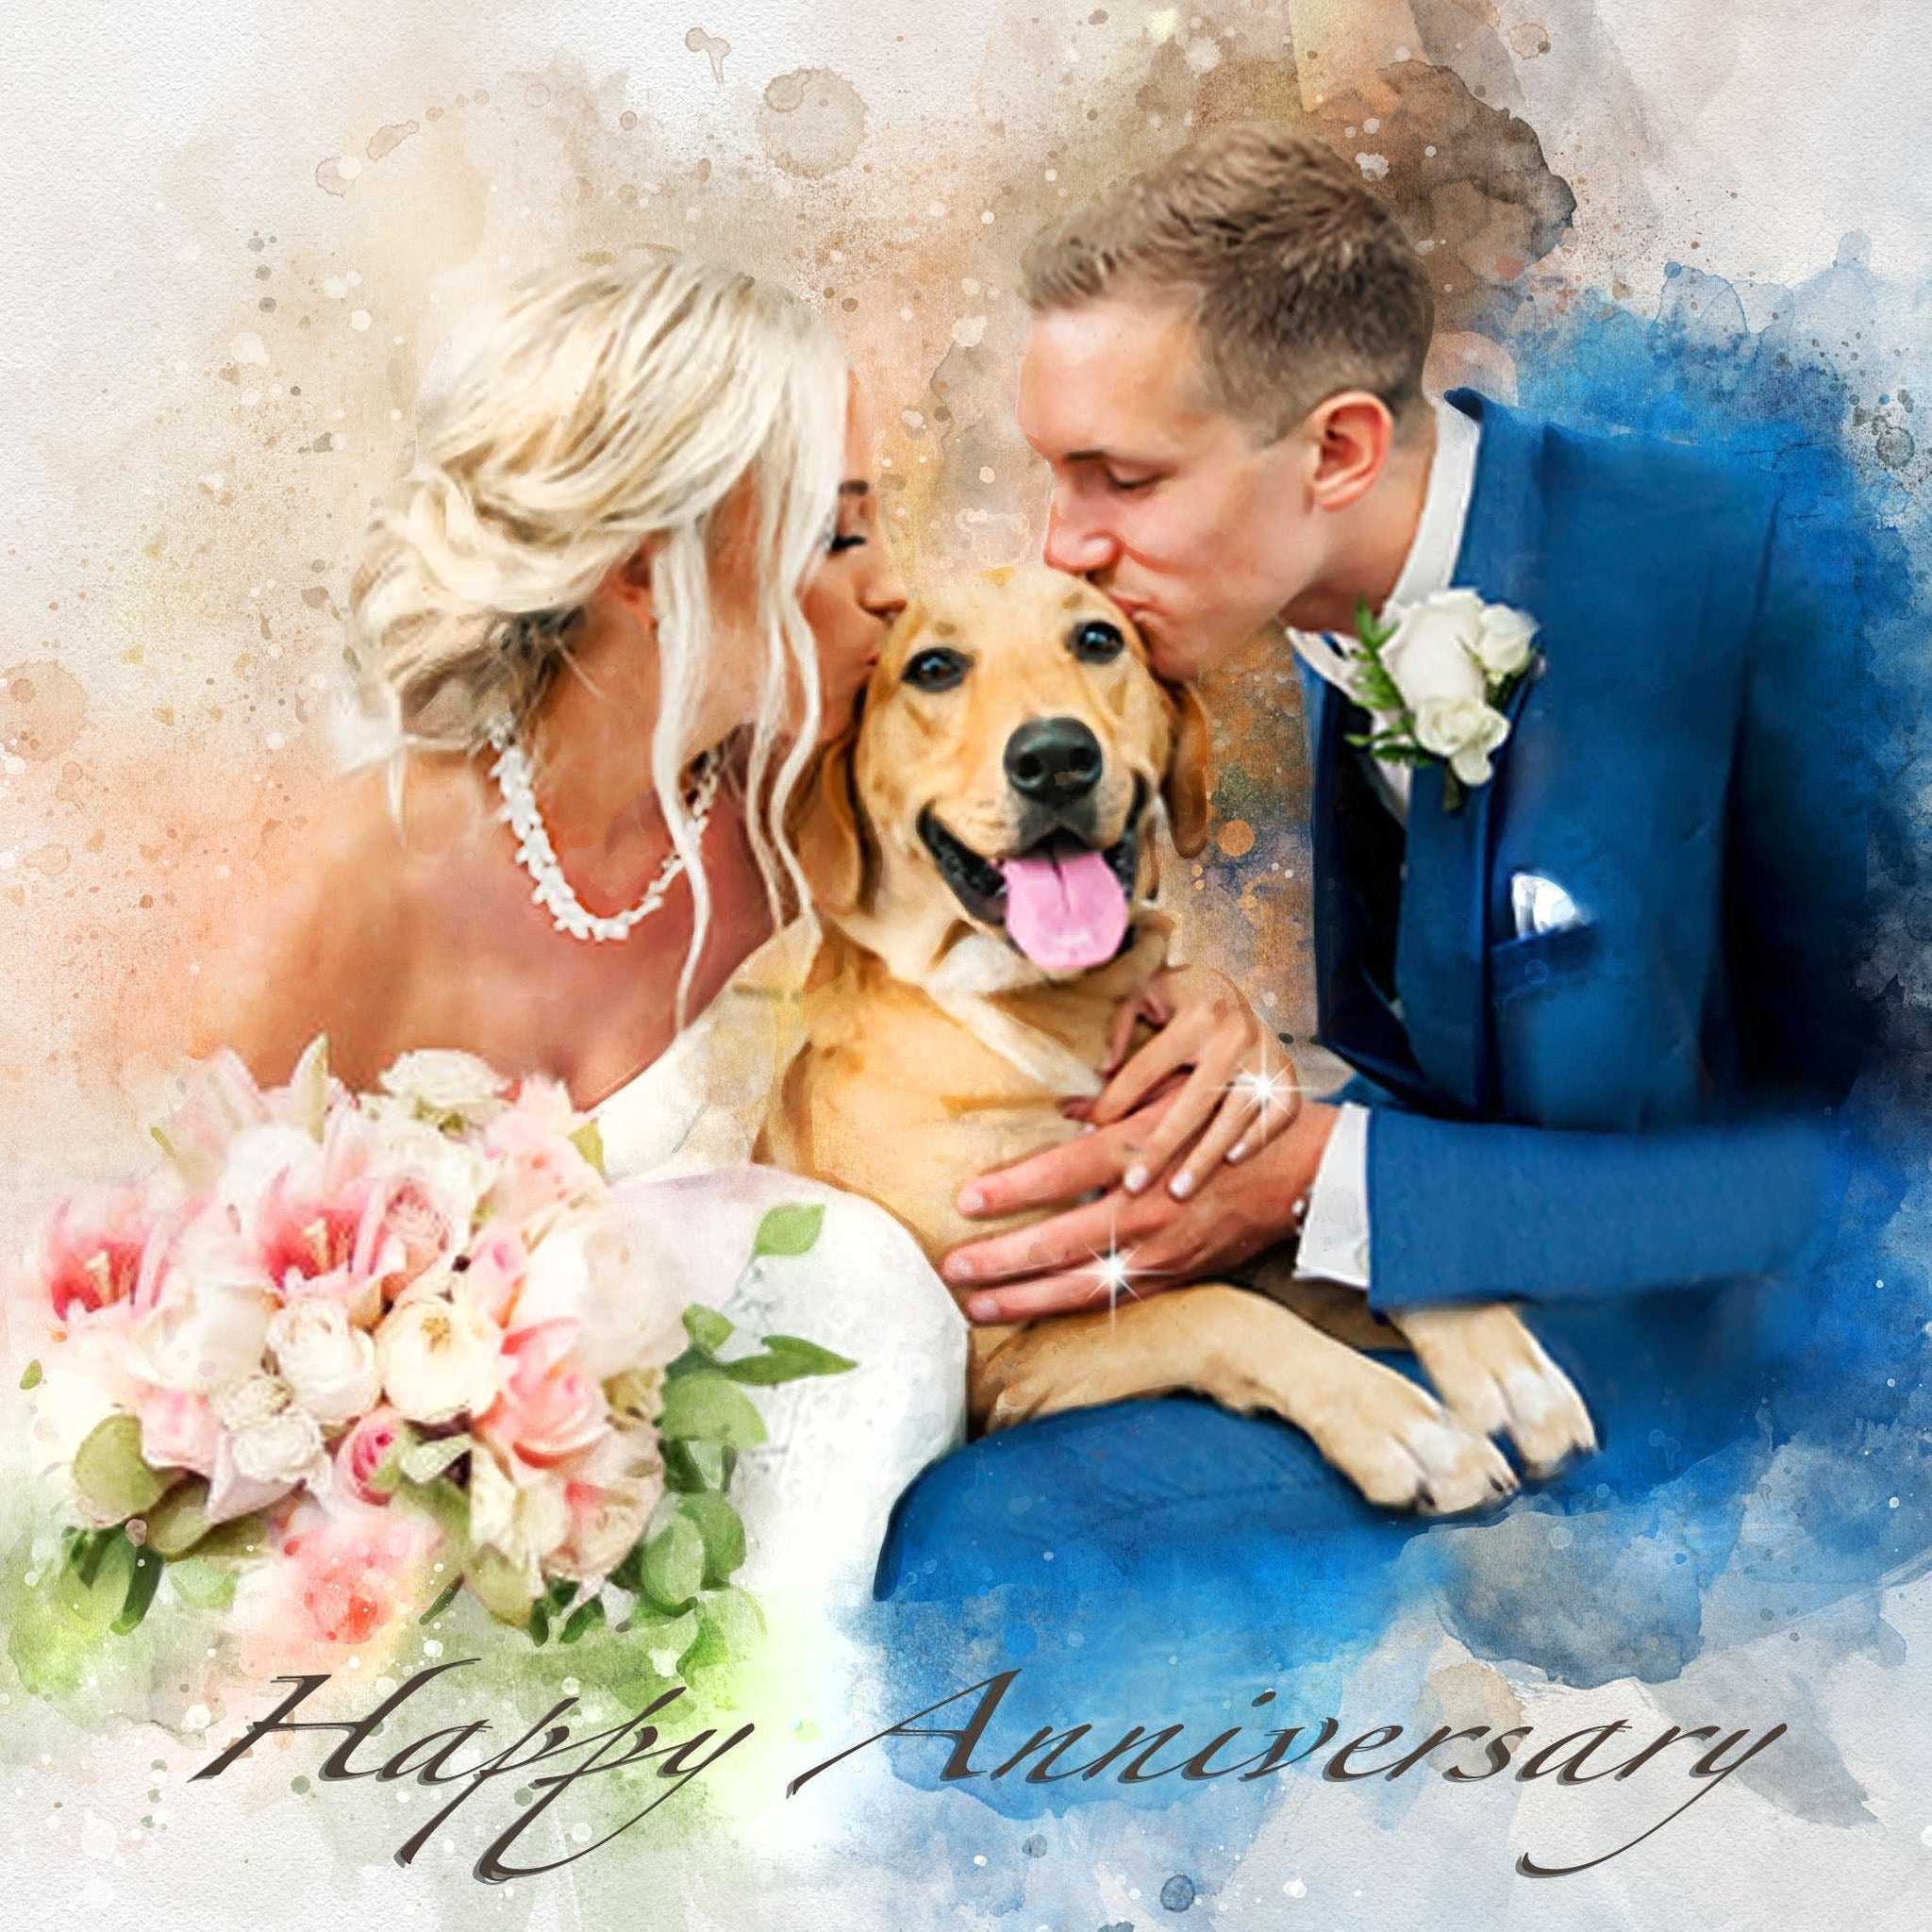 Anniversary Gift| Turn Photo into Painting ❤️ Personalized Painting from Photo - FromPicToArt